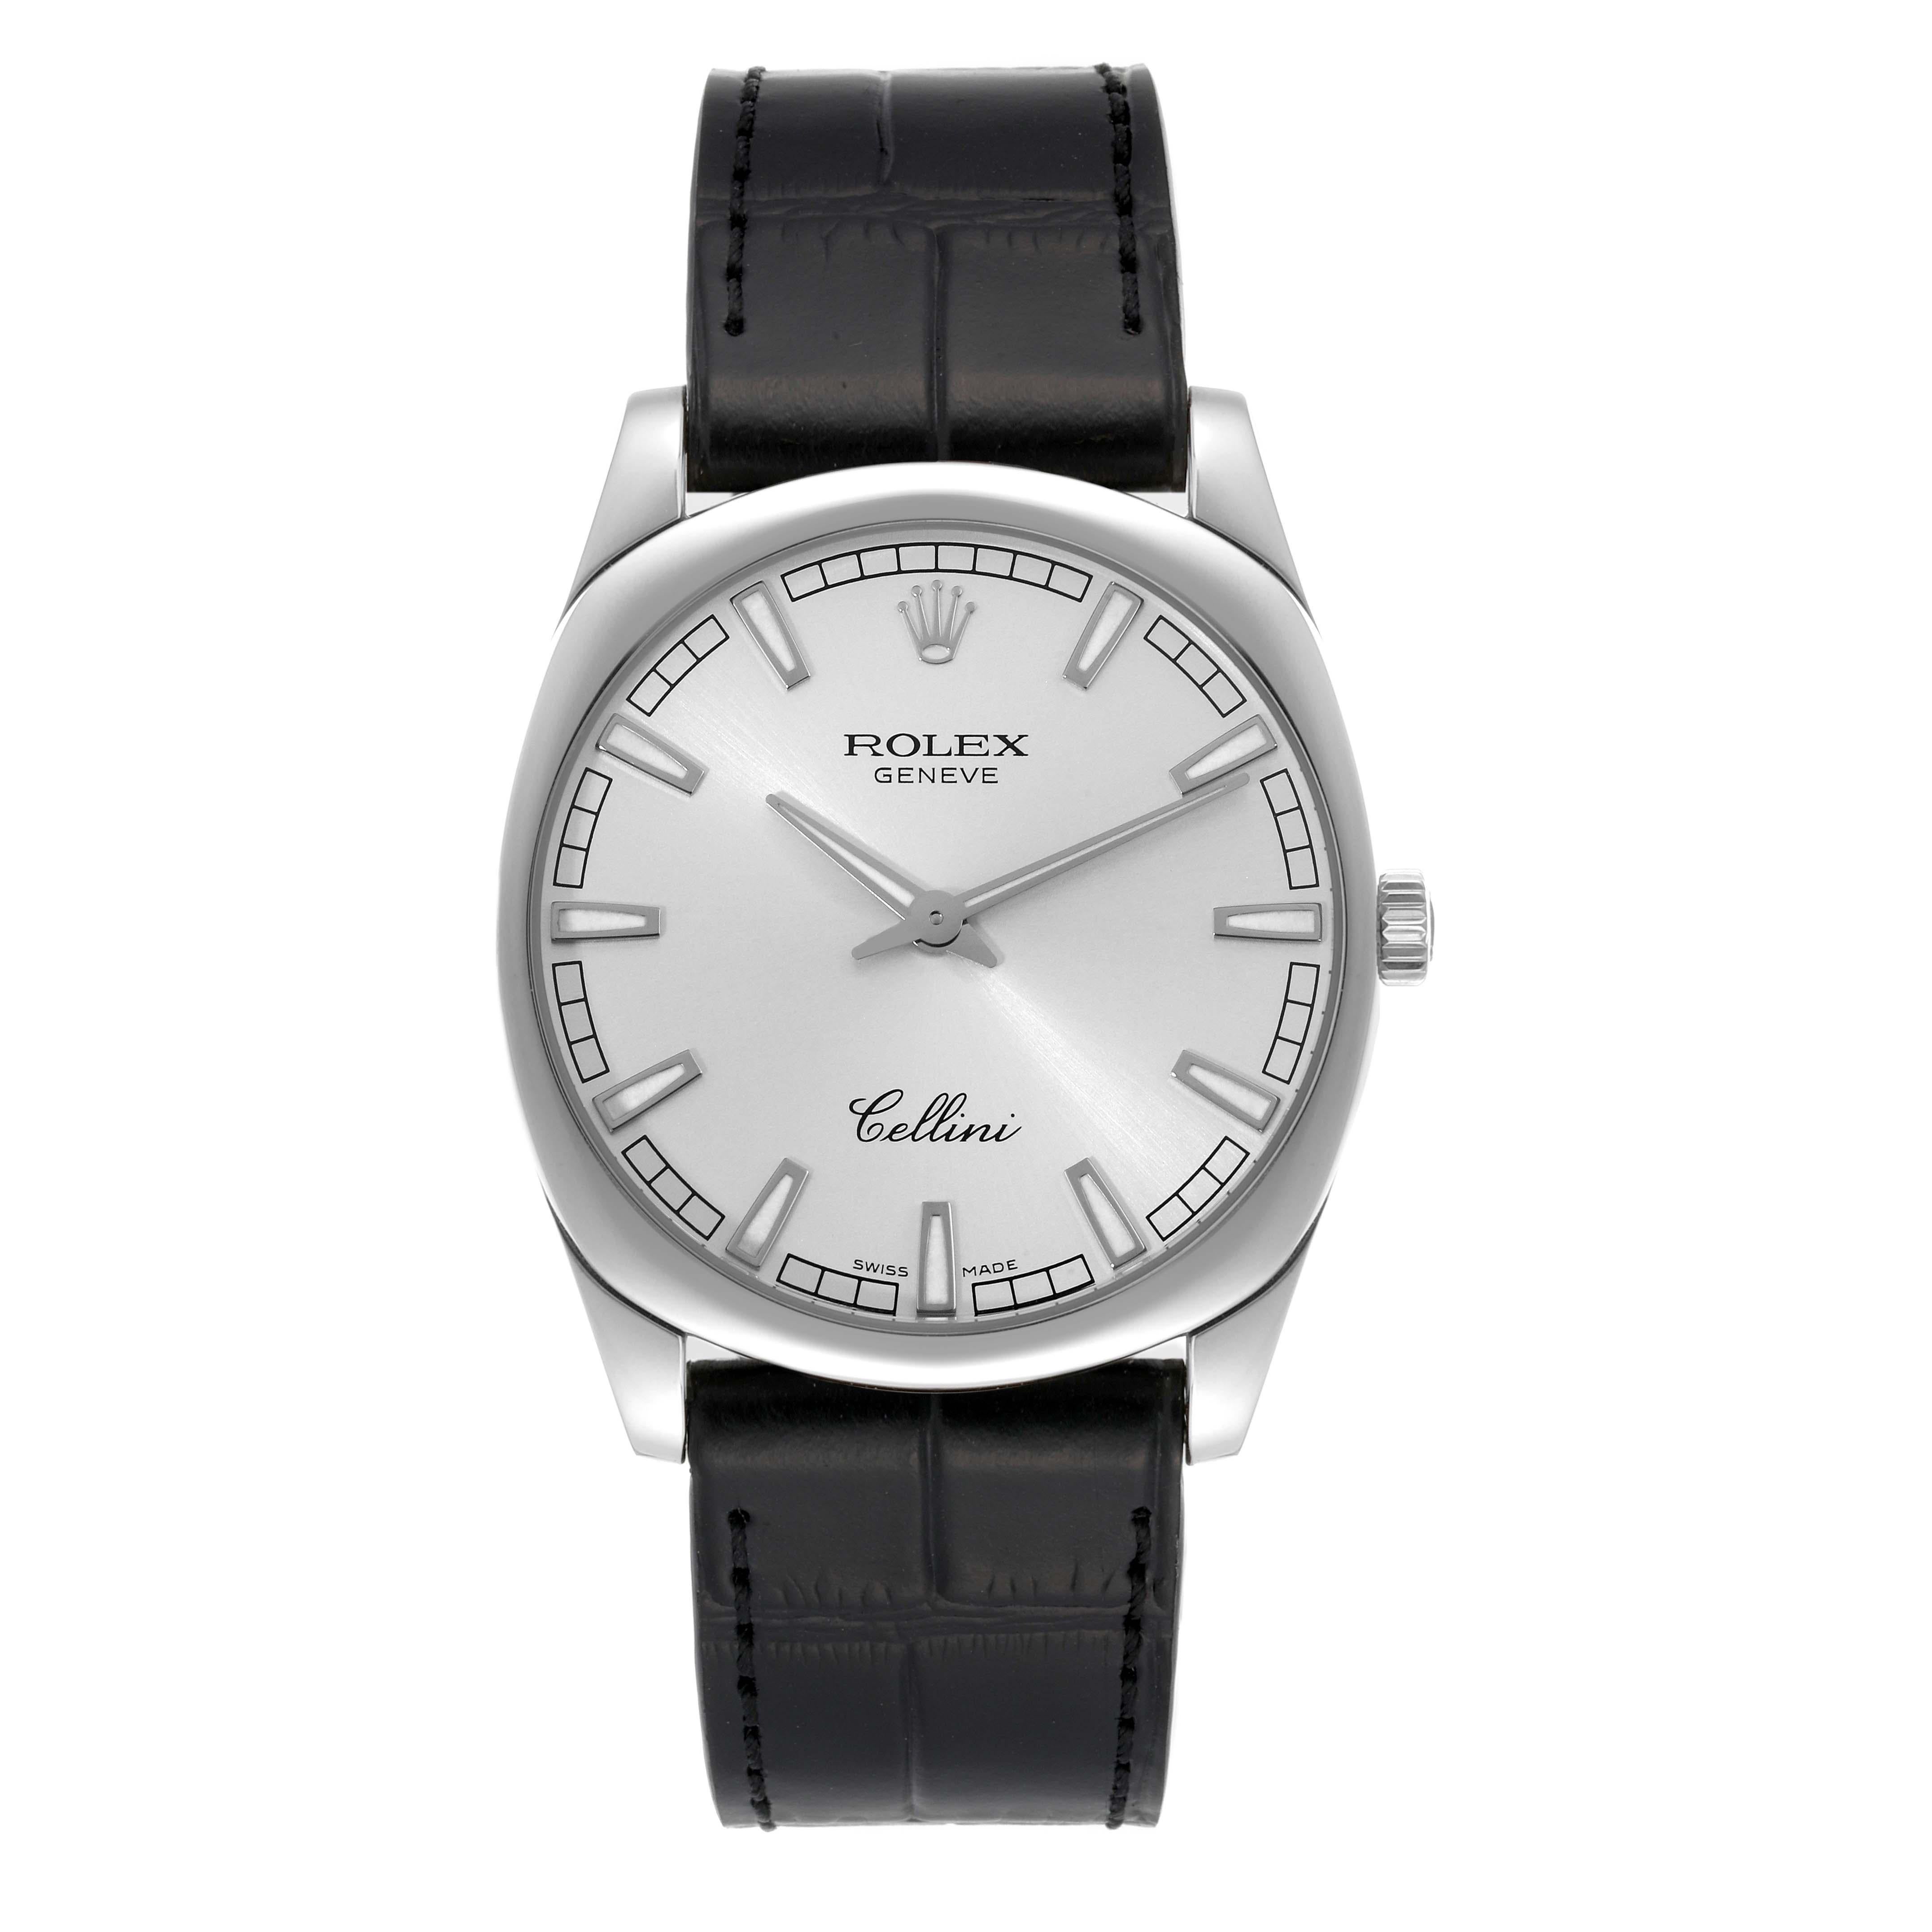 Rolex Cellini Danaos White Gold Silver Dial Mens Watch 4243. Manual winding movement. 18k white gold rounded rectangular case 38.0 mm. Rolex logo on a crown. 18k white gold smooth bezel. Scratch resistant sapphire crystal. Silver dial with luminous